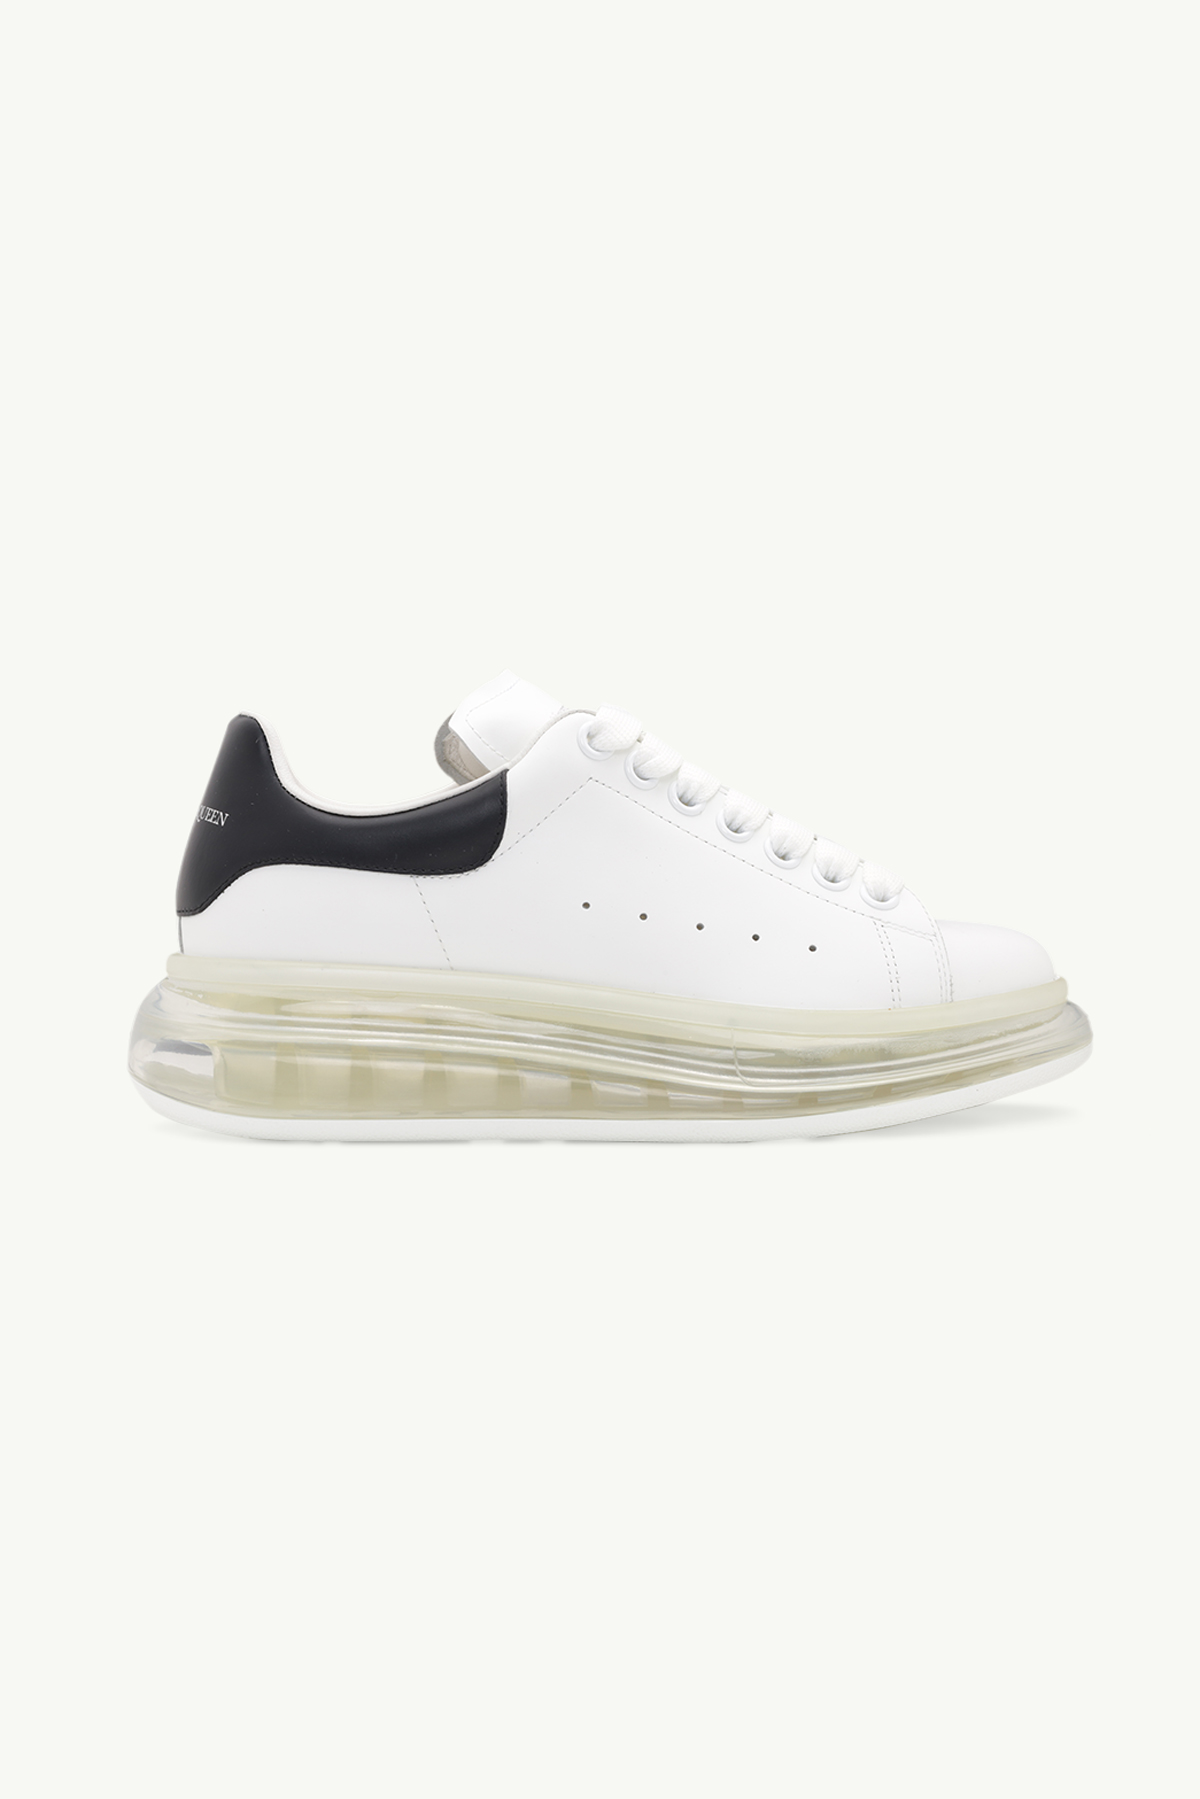 ALEXANDER MCQUEEN Women Transparent Oversized Lace-up Sneakers in White/Black Smooth Leather 0